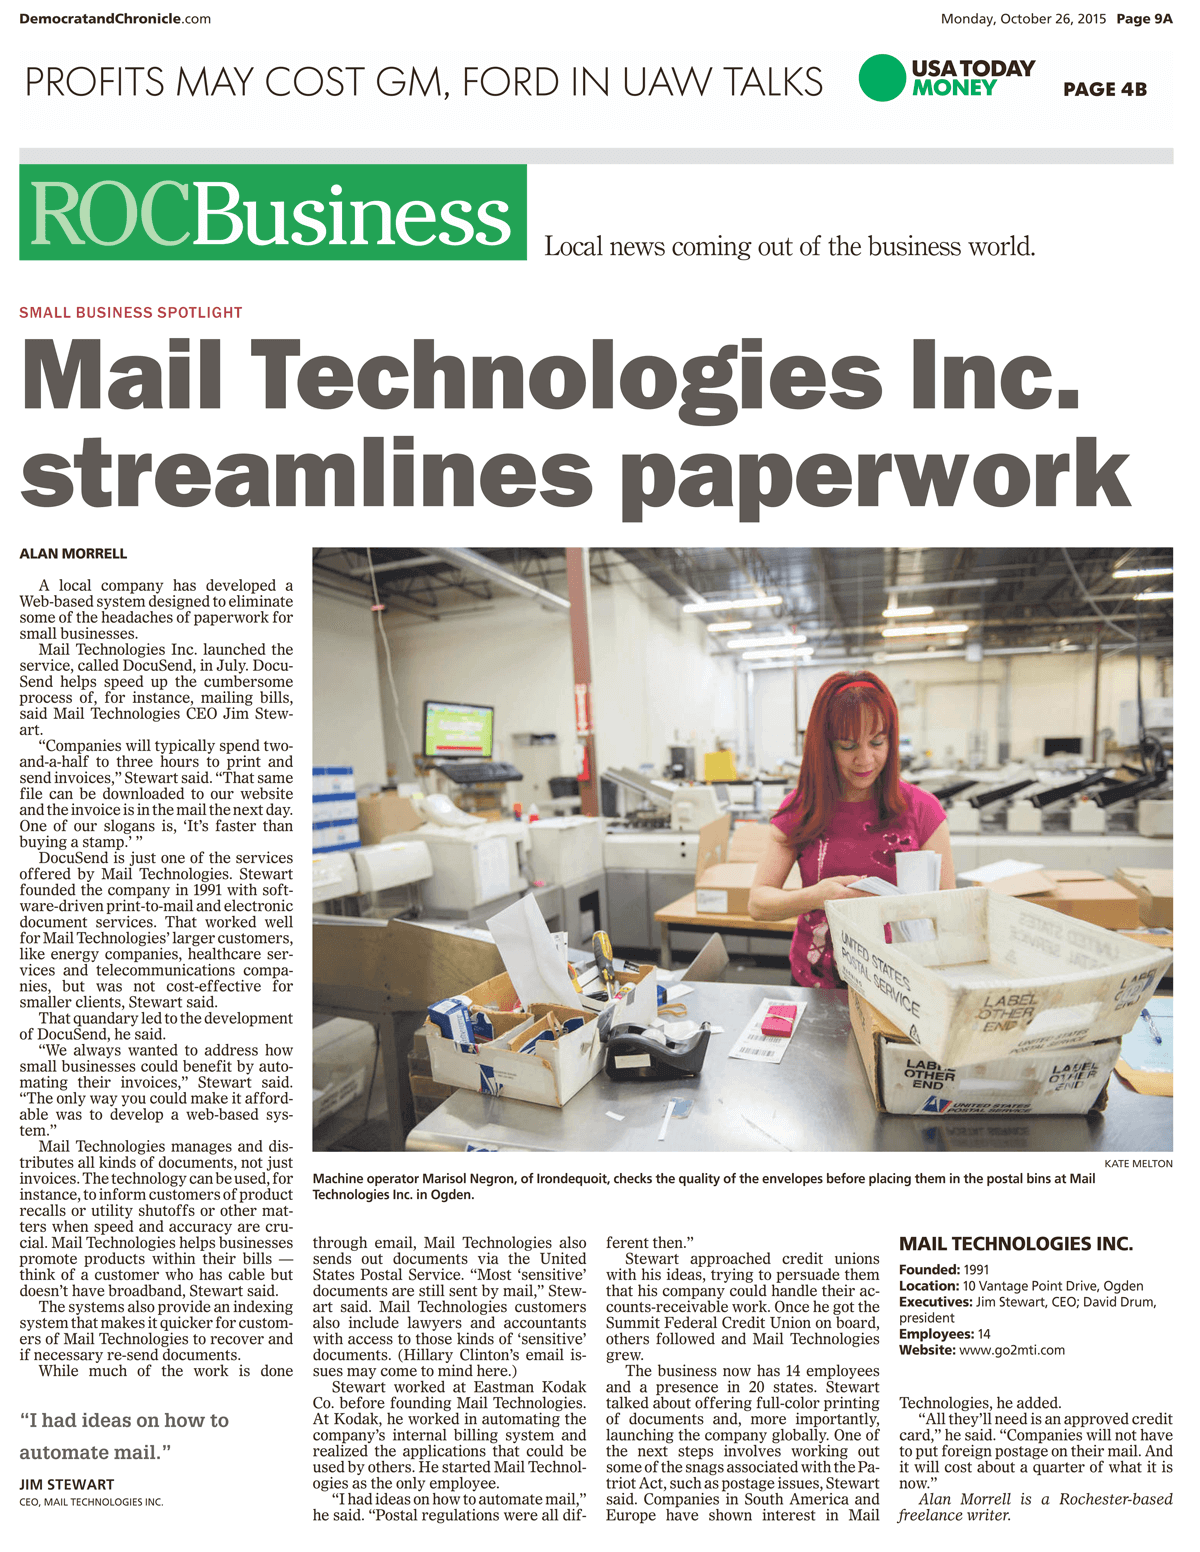 Mail Technologies Streamlines Paperwork-ROC Article